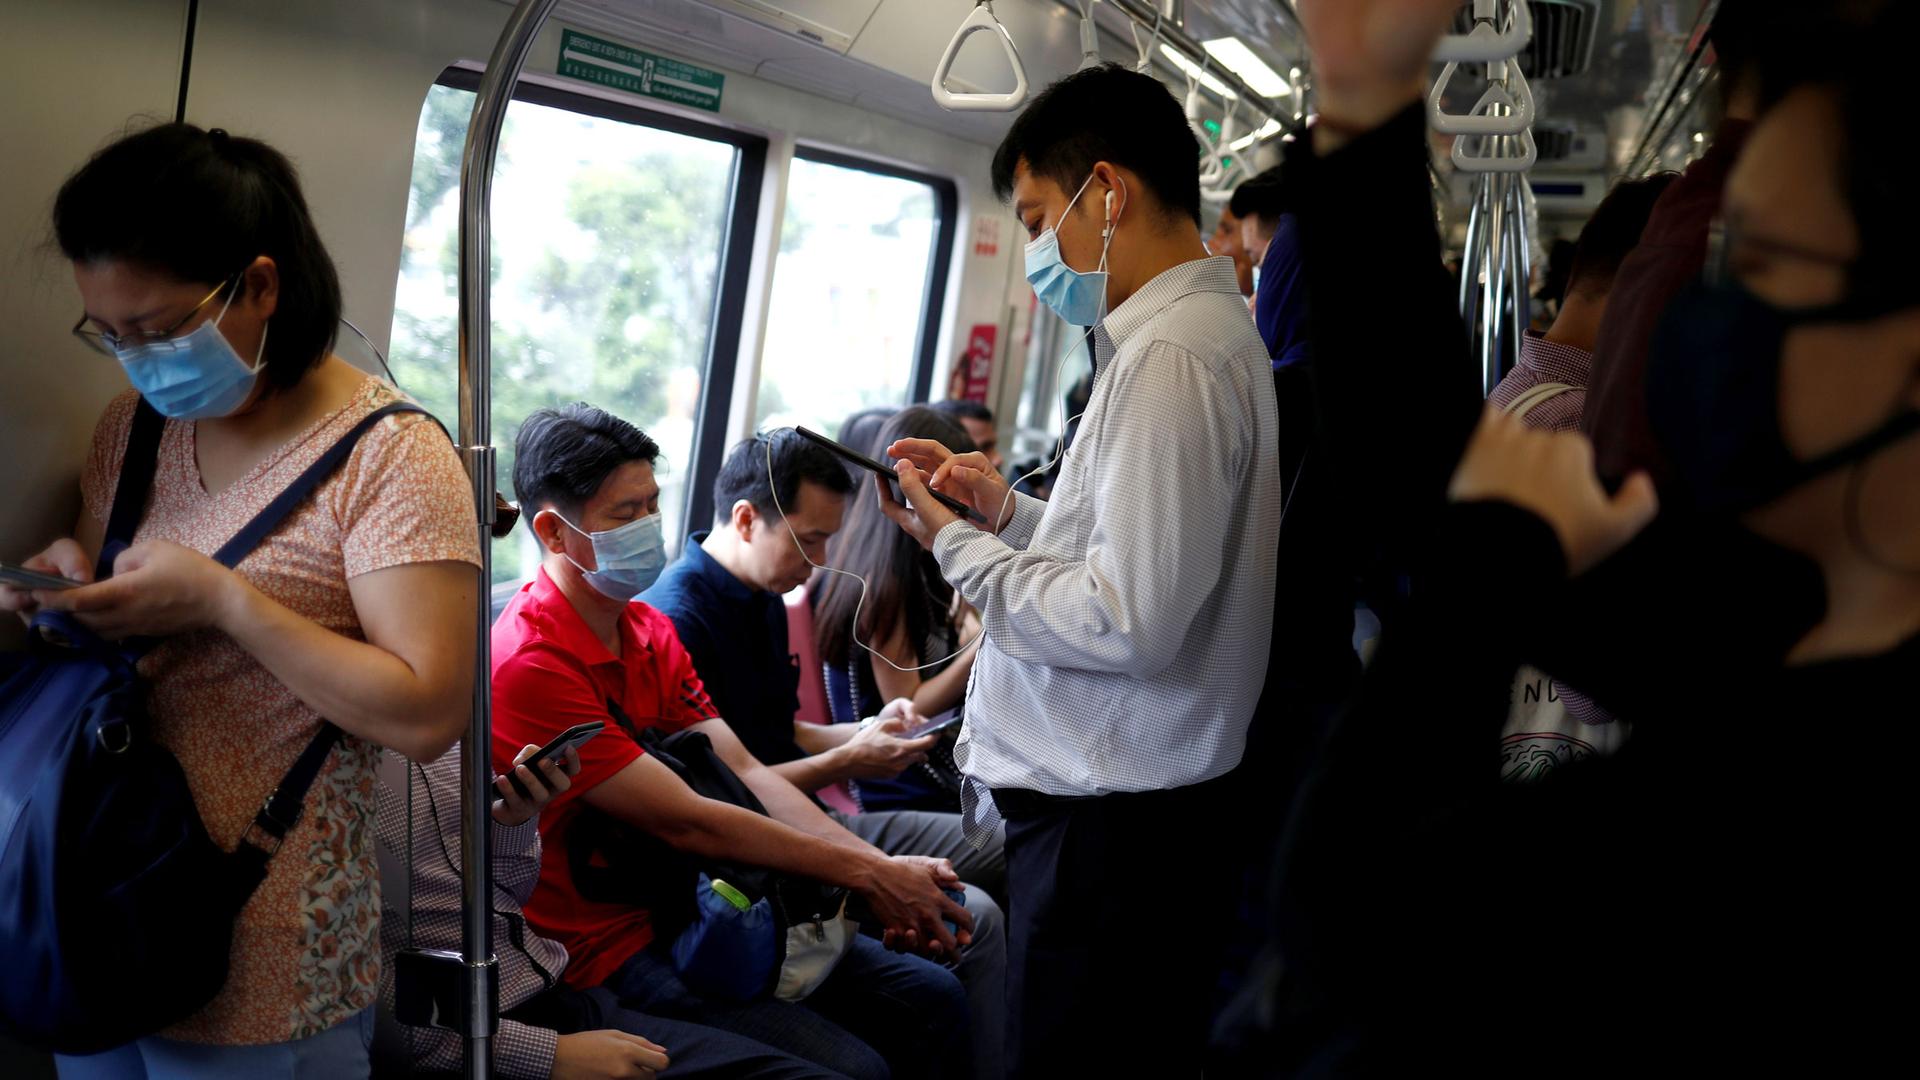 Commuters wearing masks in precaution of the coronavirus outbreak are pictured in a train during their morning commute in Singapore, Feb. 18, 2020. 